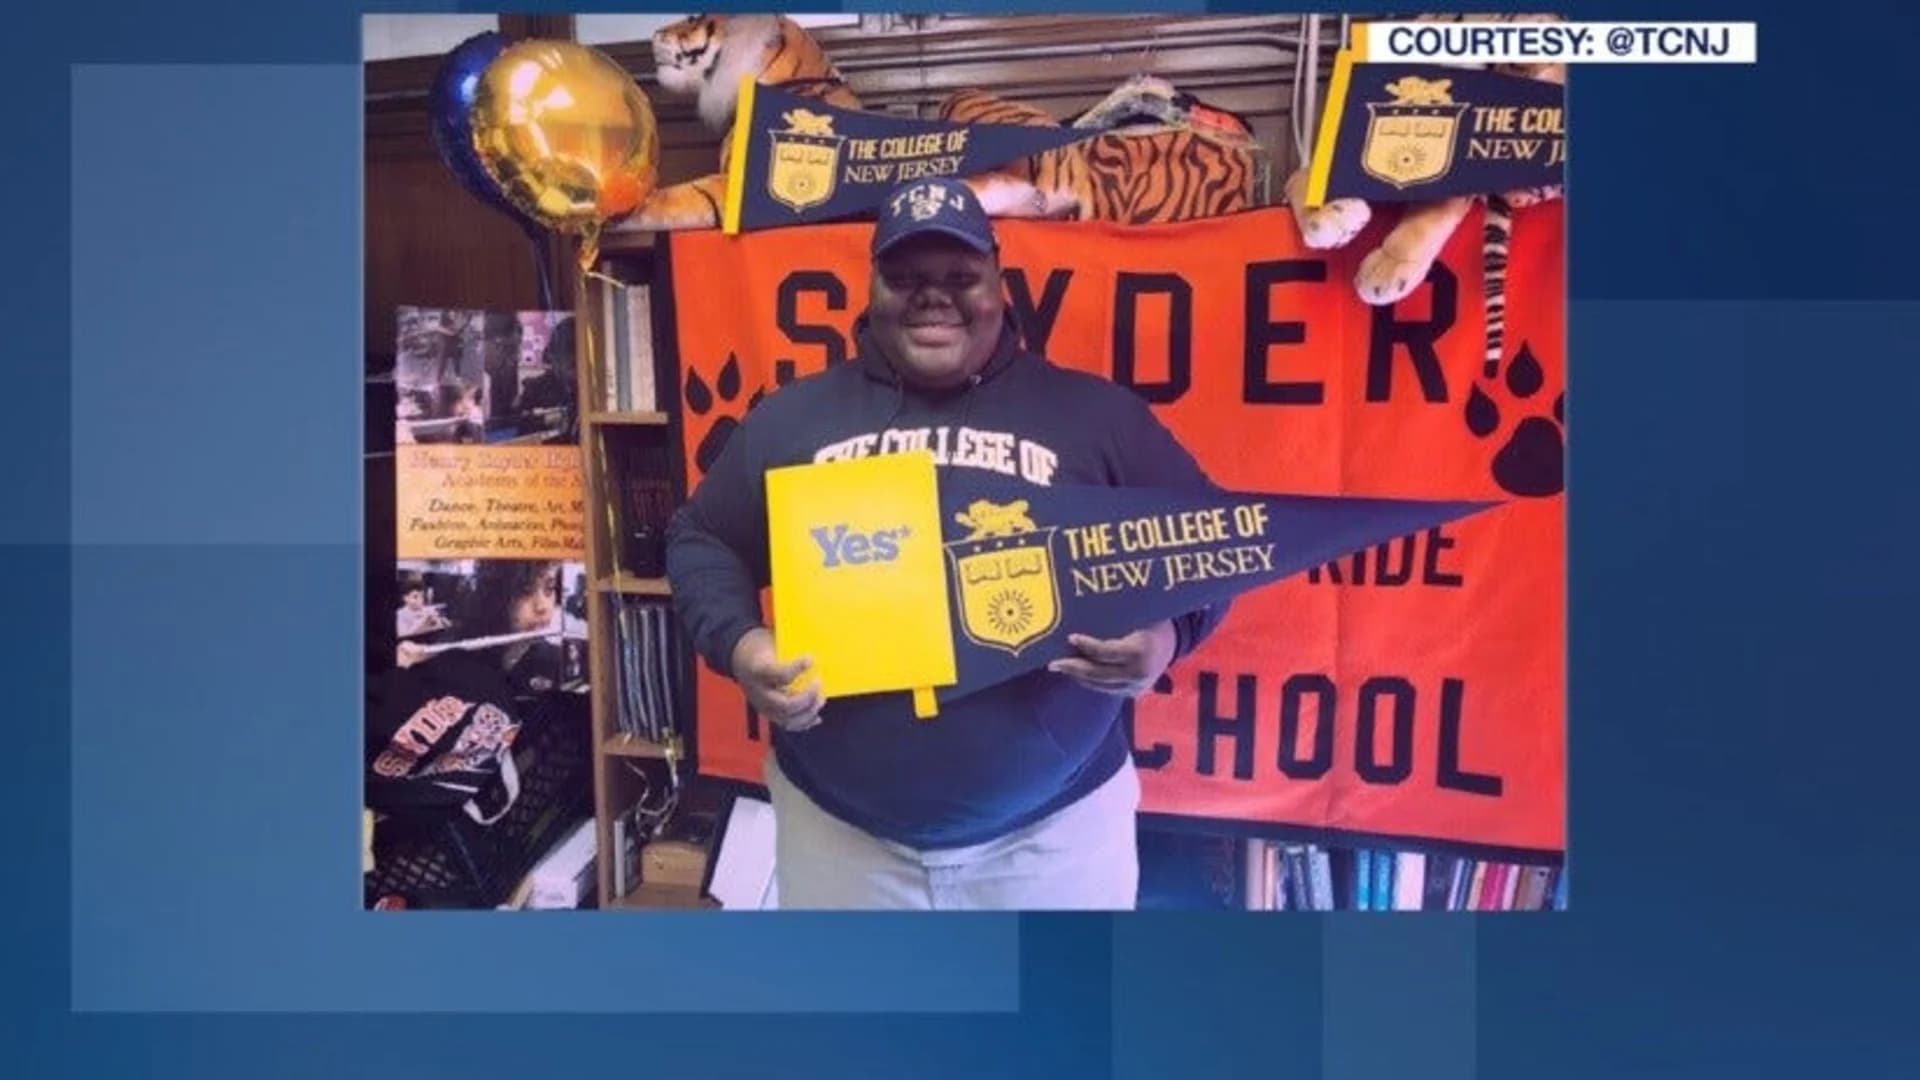 Teen who was homeless accepted to 17 colleges, including top choice of TCNJ